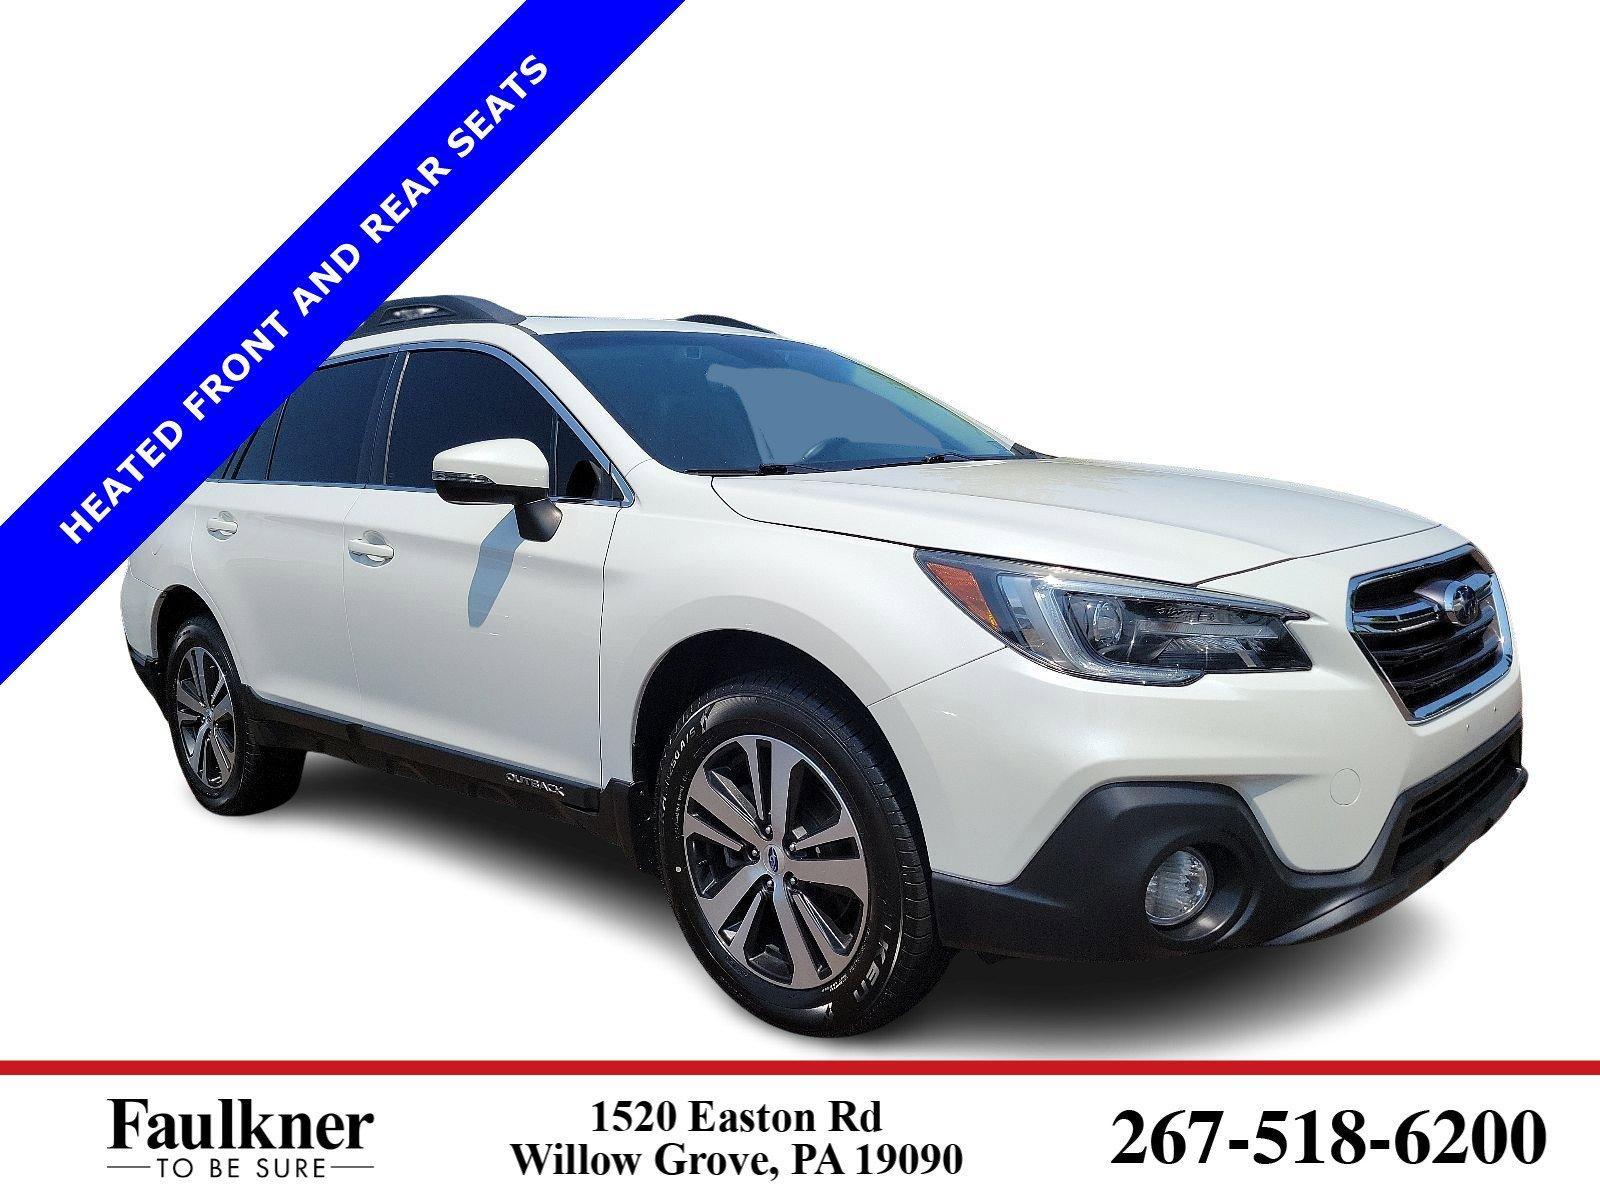 2019 Subaru Outback Vehicle Photo in Willow Grove, PA 19090